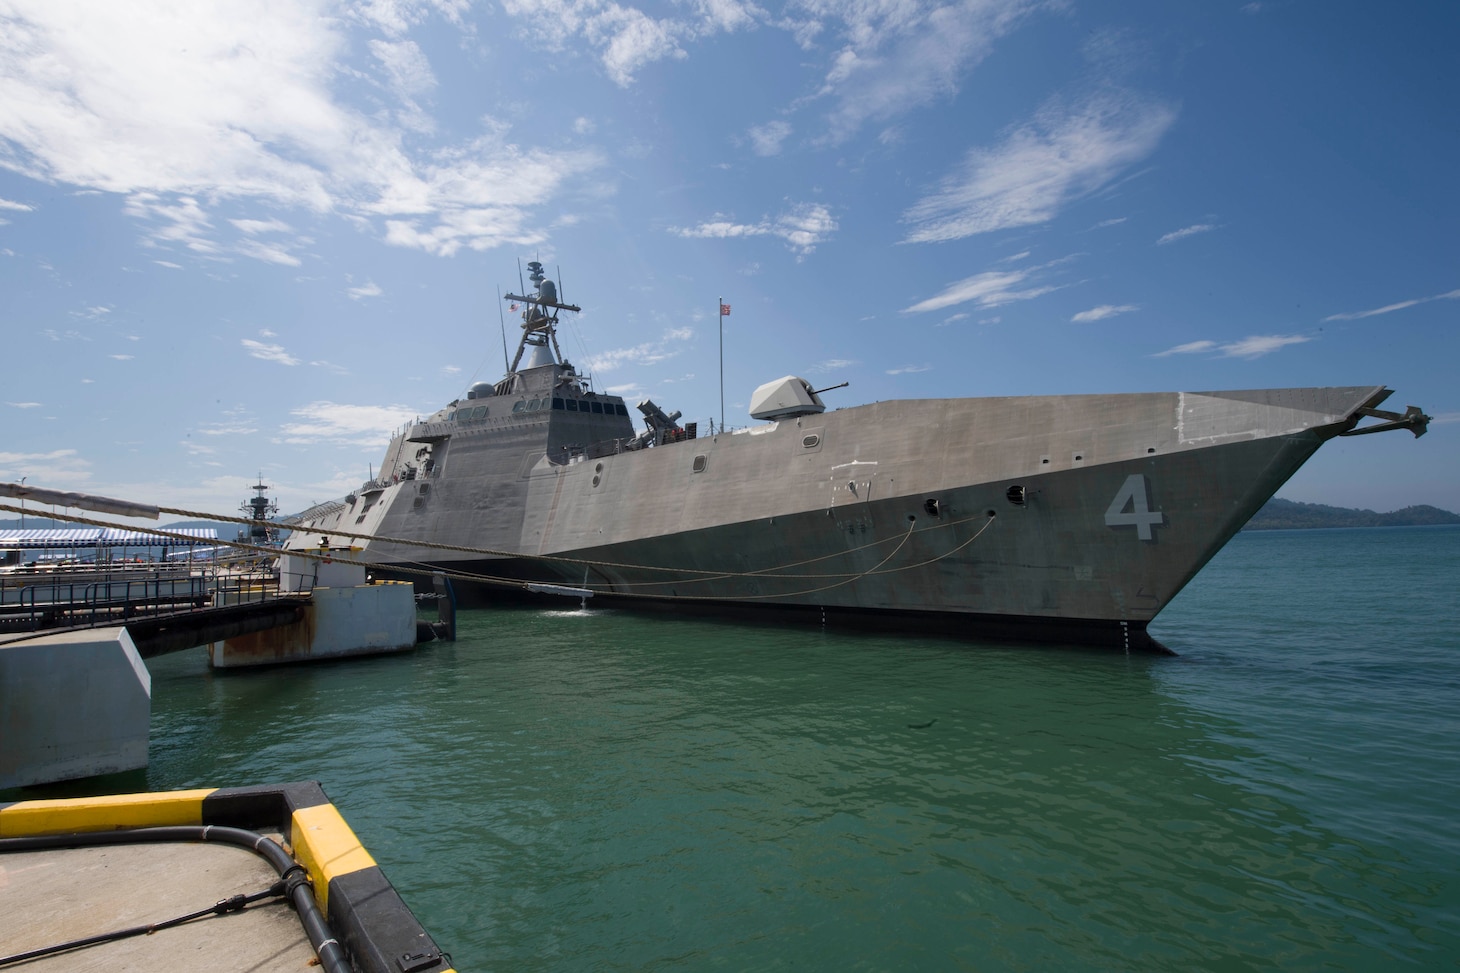 The littoral combat ship USS Coronado (LCS 4) moors pierside in Langkawi, Malaysia during the Langkawi International Maritime and Aerospace Exhibition 2017. The ship is on a rotational deployment in U.S. 7th Fleet area of responsibility, Mar. 25, 2017. Coronado is a fast and agile warship tailor-made to patrol the region's littorals and work hull-to-hull with partner navies, providing 7th Fleet with the flexible capabilities it needs now and in the future.